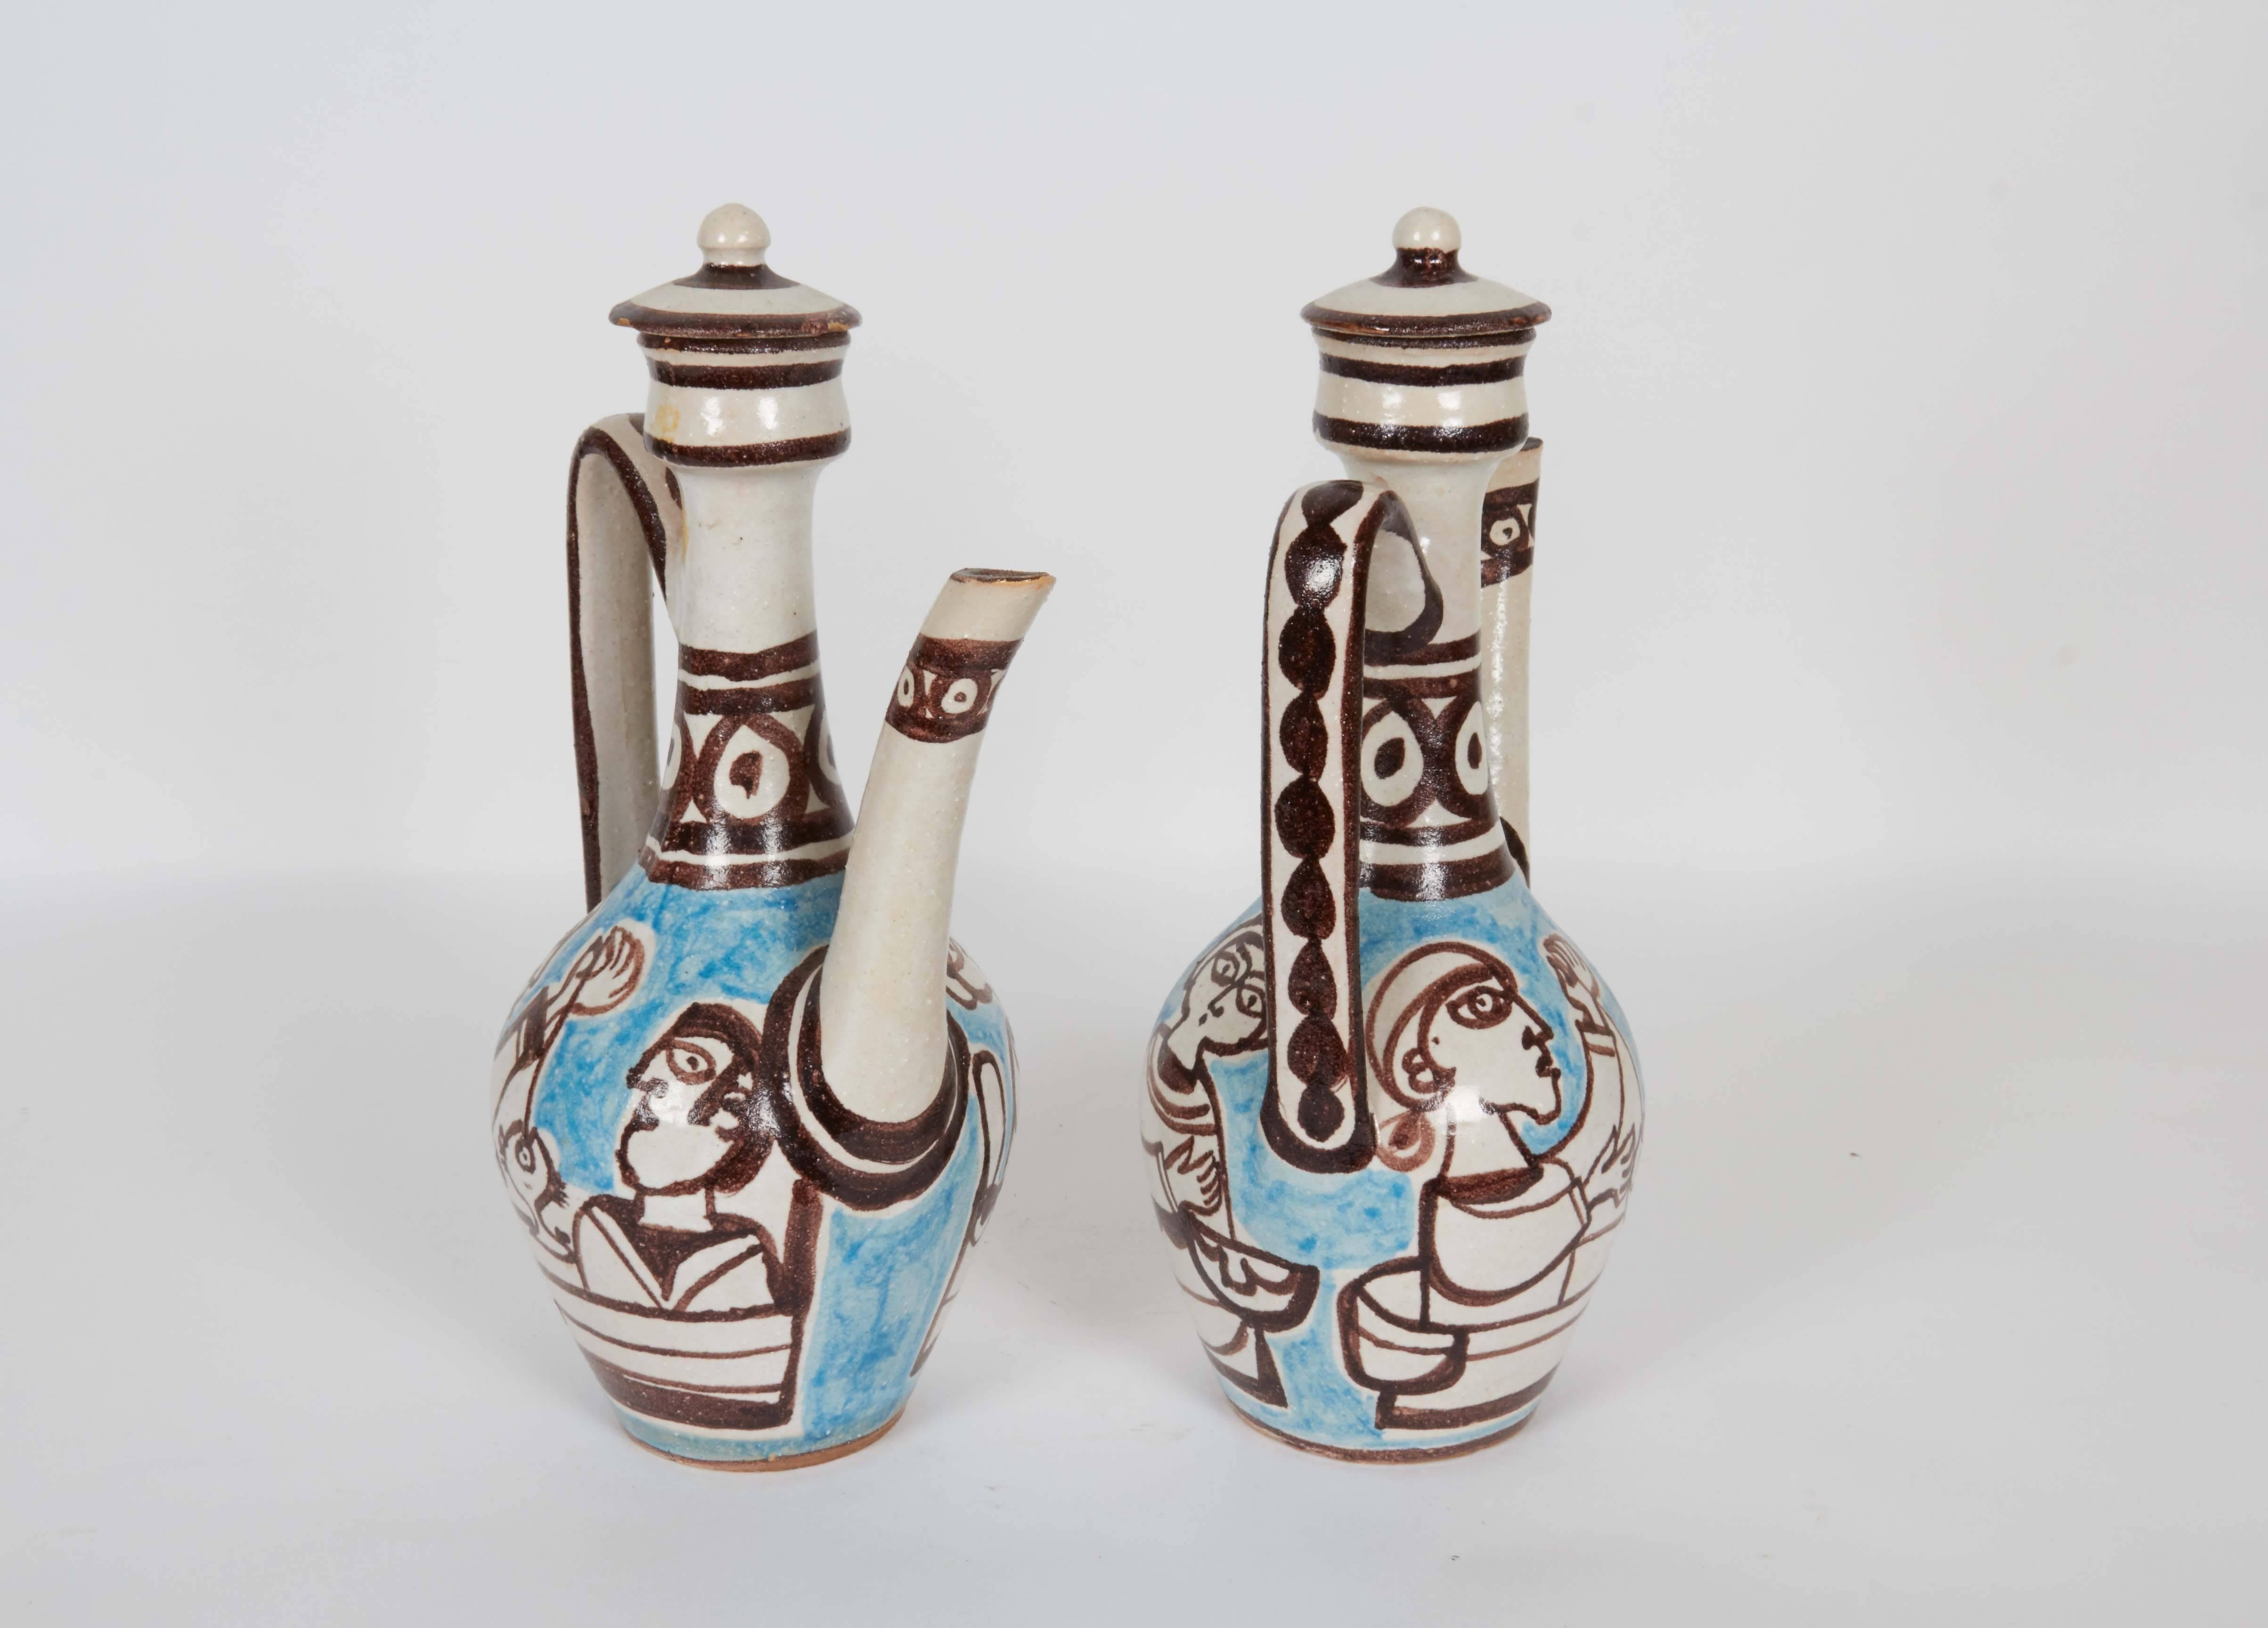 A pair of lidded pottery ewers by ceramic designer Giovanni de Simone, produced in Italy, circa 1960s, each with handle and long spout, decorated with brown, white and blue glazes. Markings include [DeSimone/ ITALY/ 37] to the underside of the